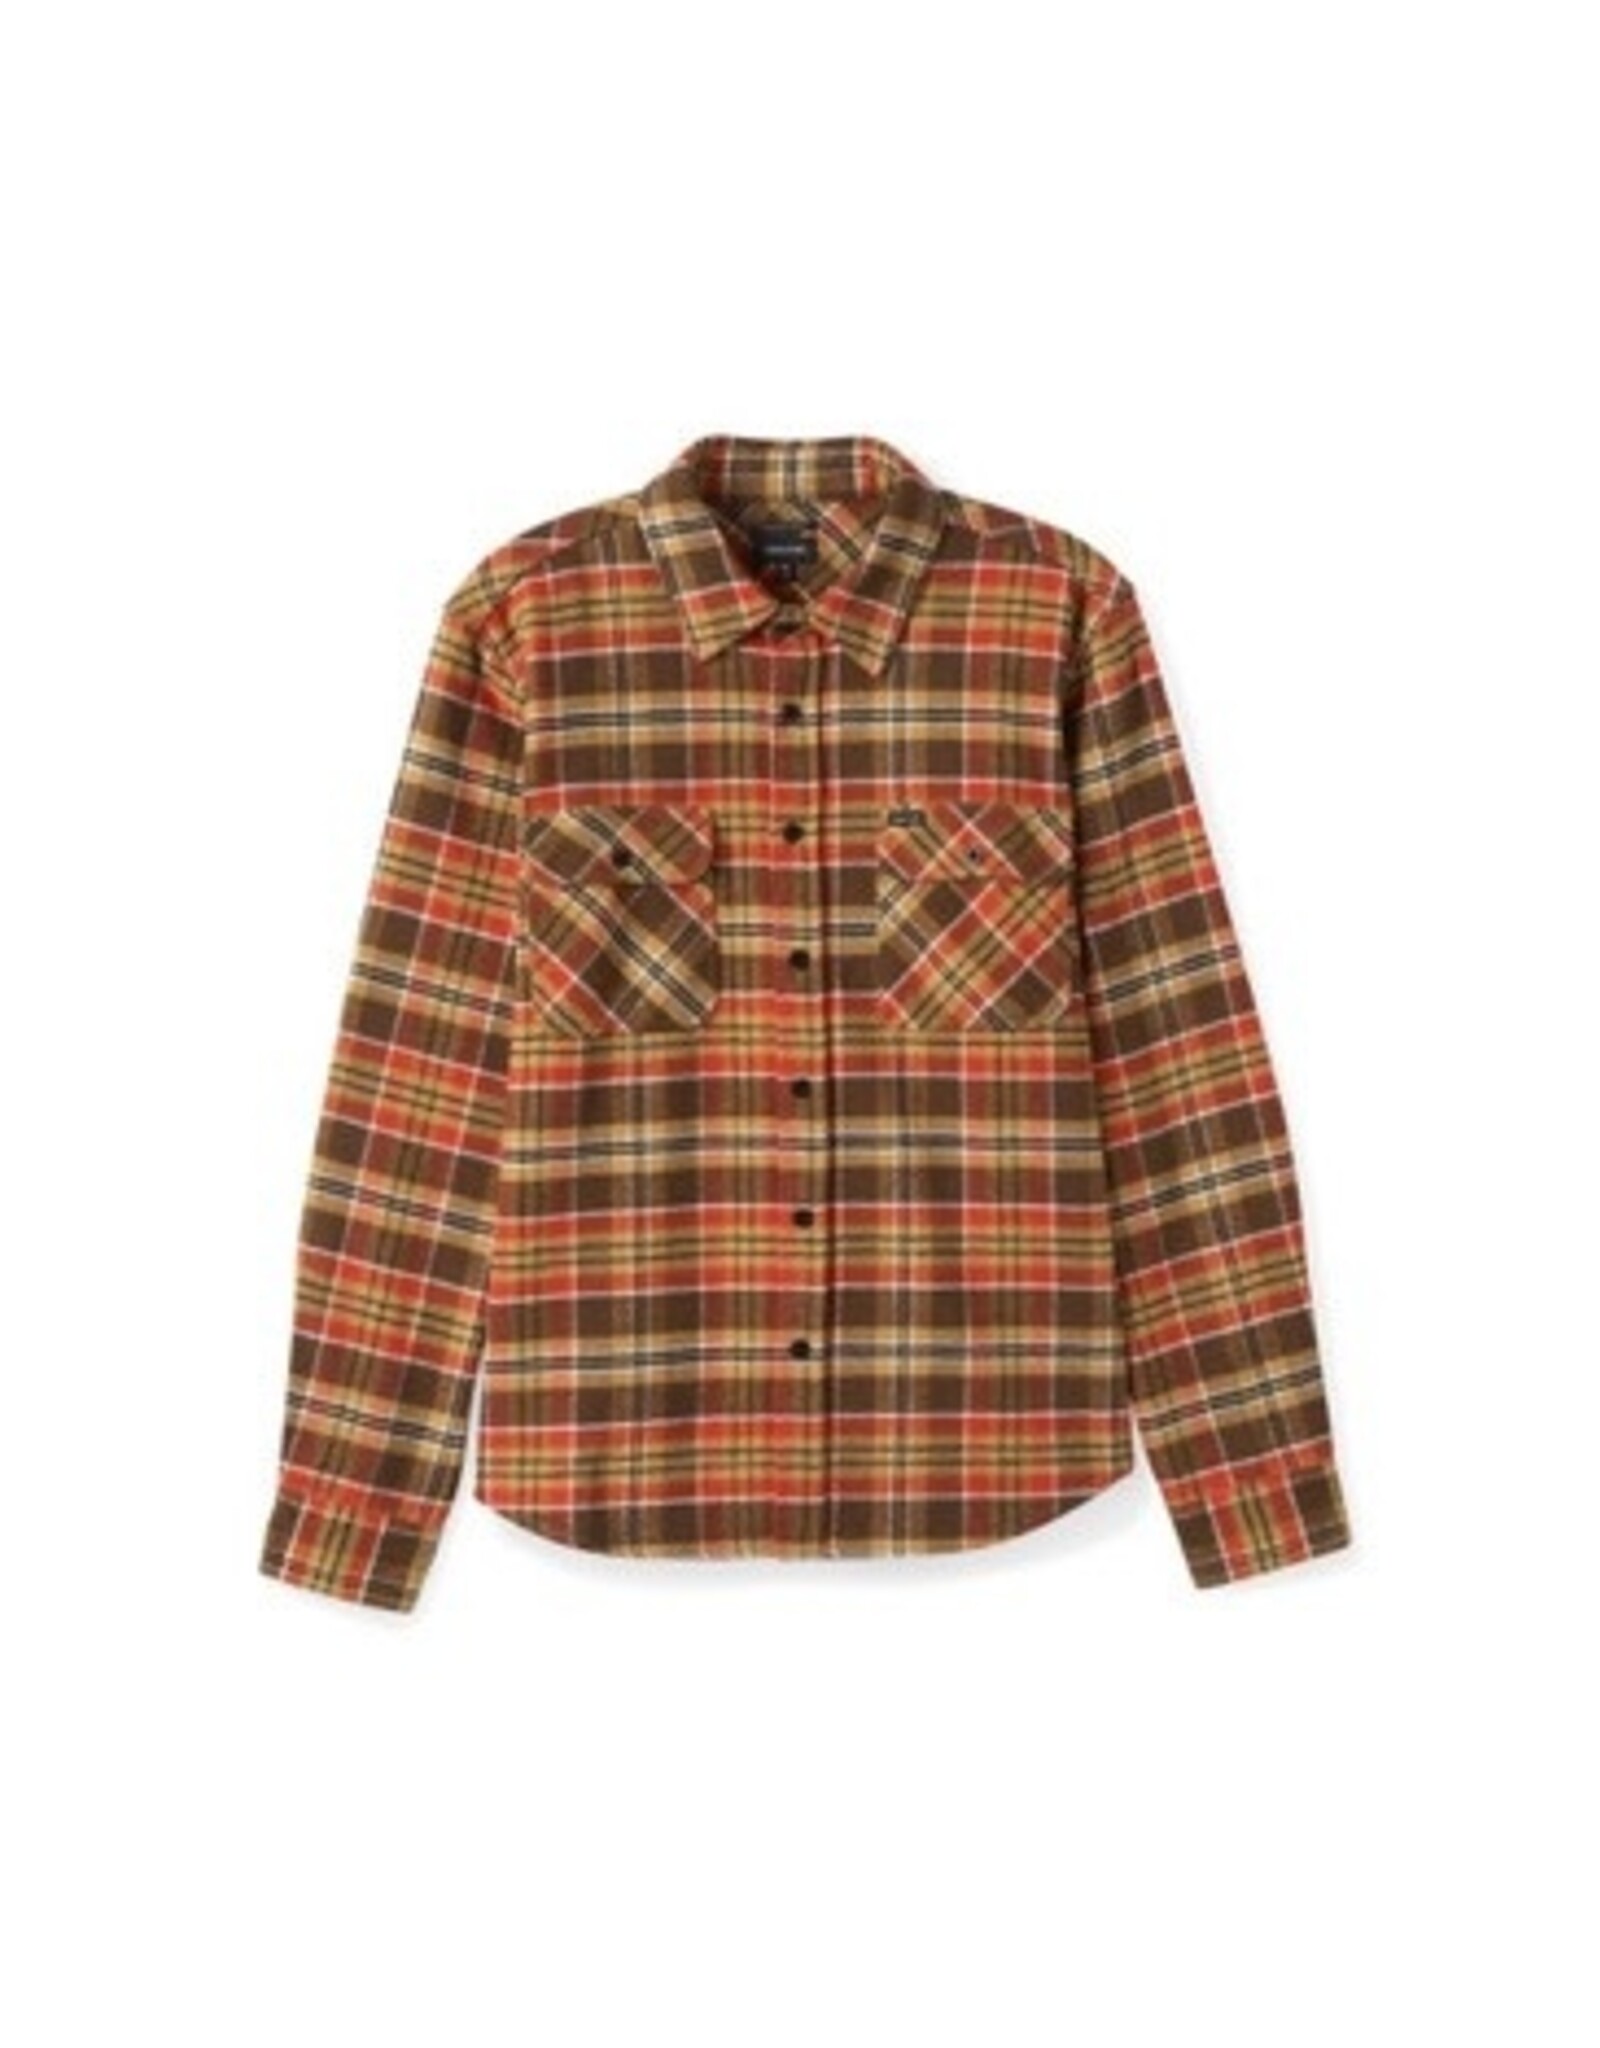 BGS Brixton - Flannel Heavy / Tan & Red